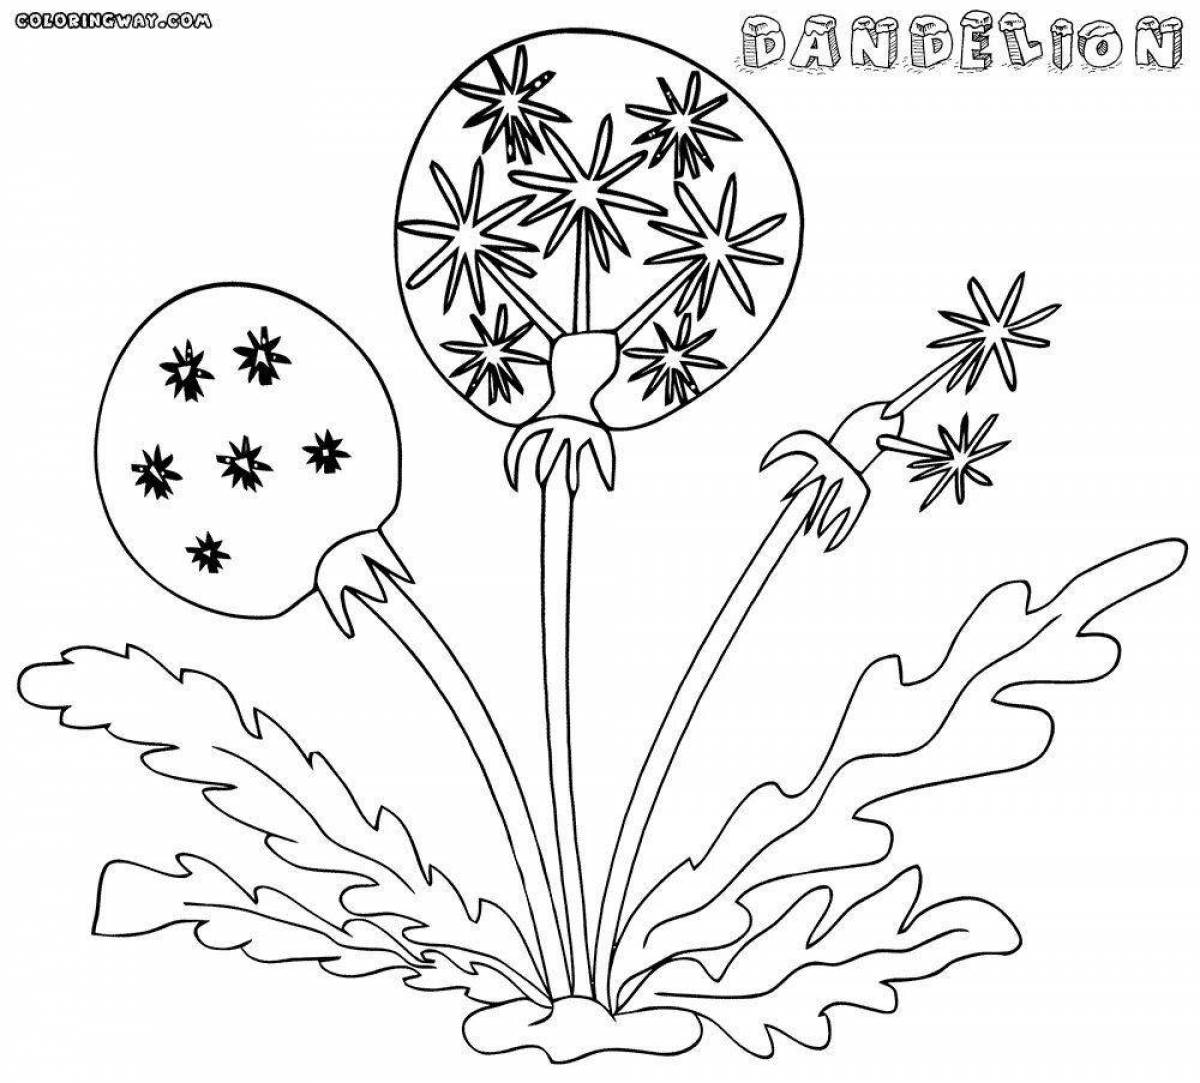 Cute dandelion coloring page for kids